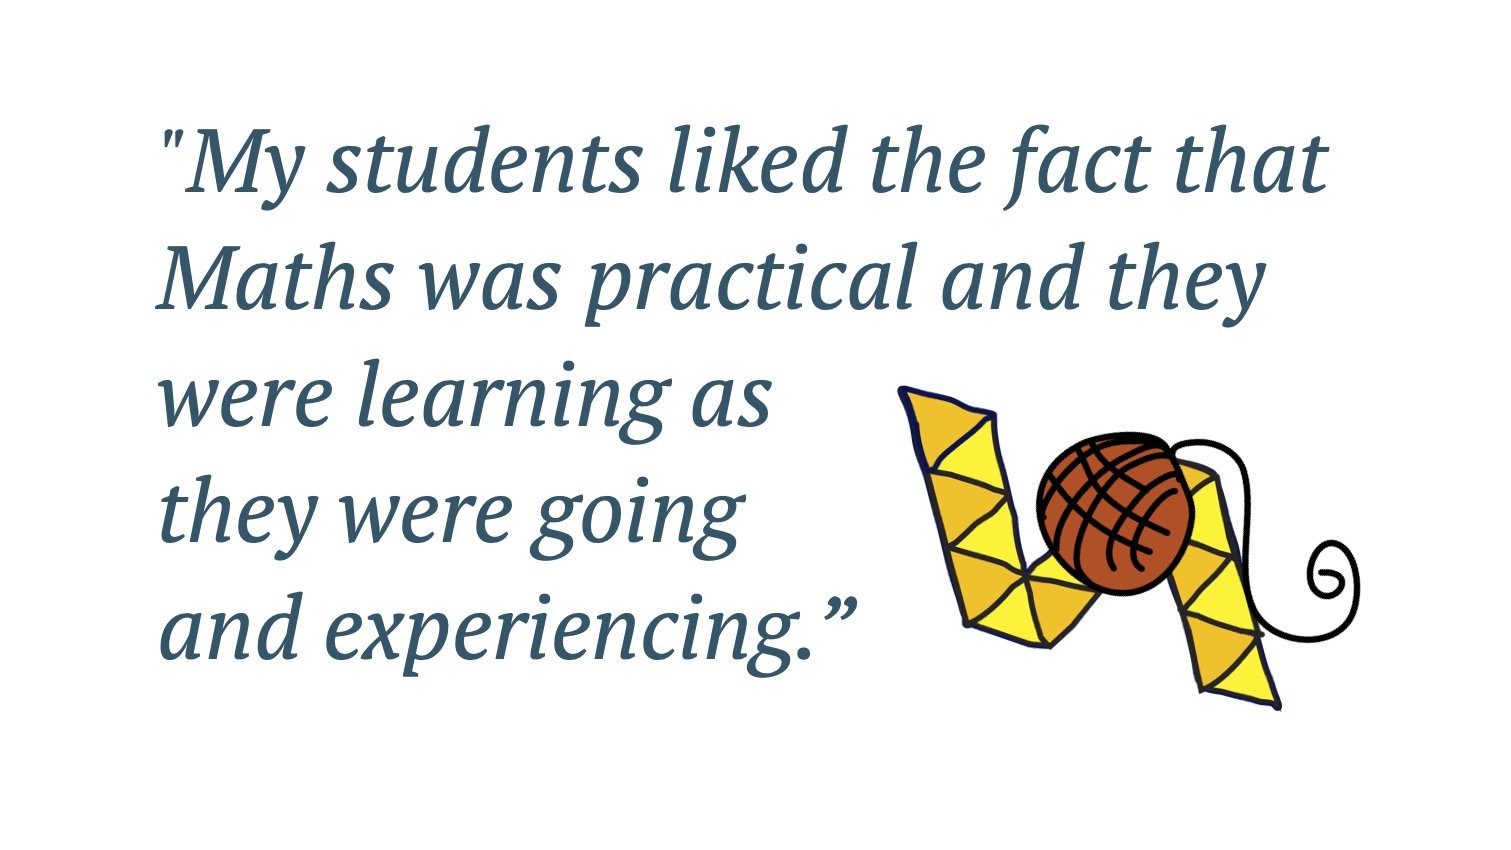 Quote: My students liked the fact that Maths was practical and they were learning as they were going and experiencing.